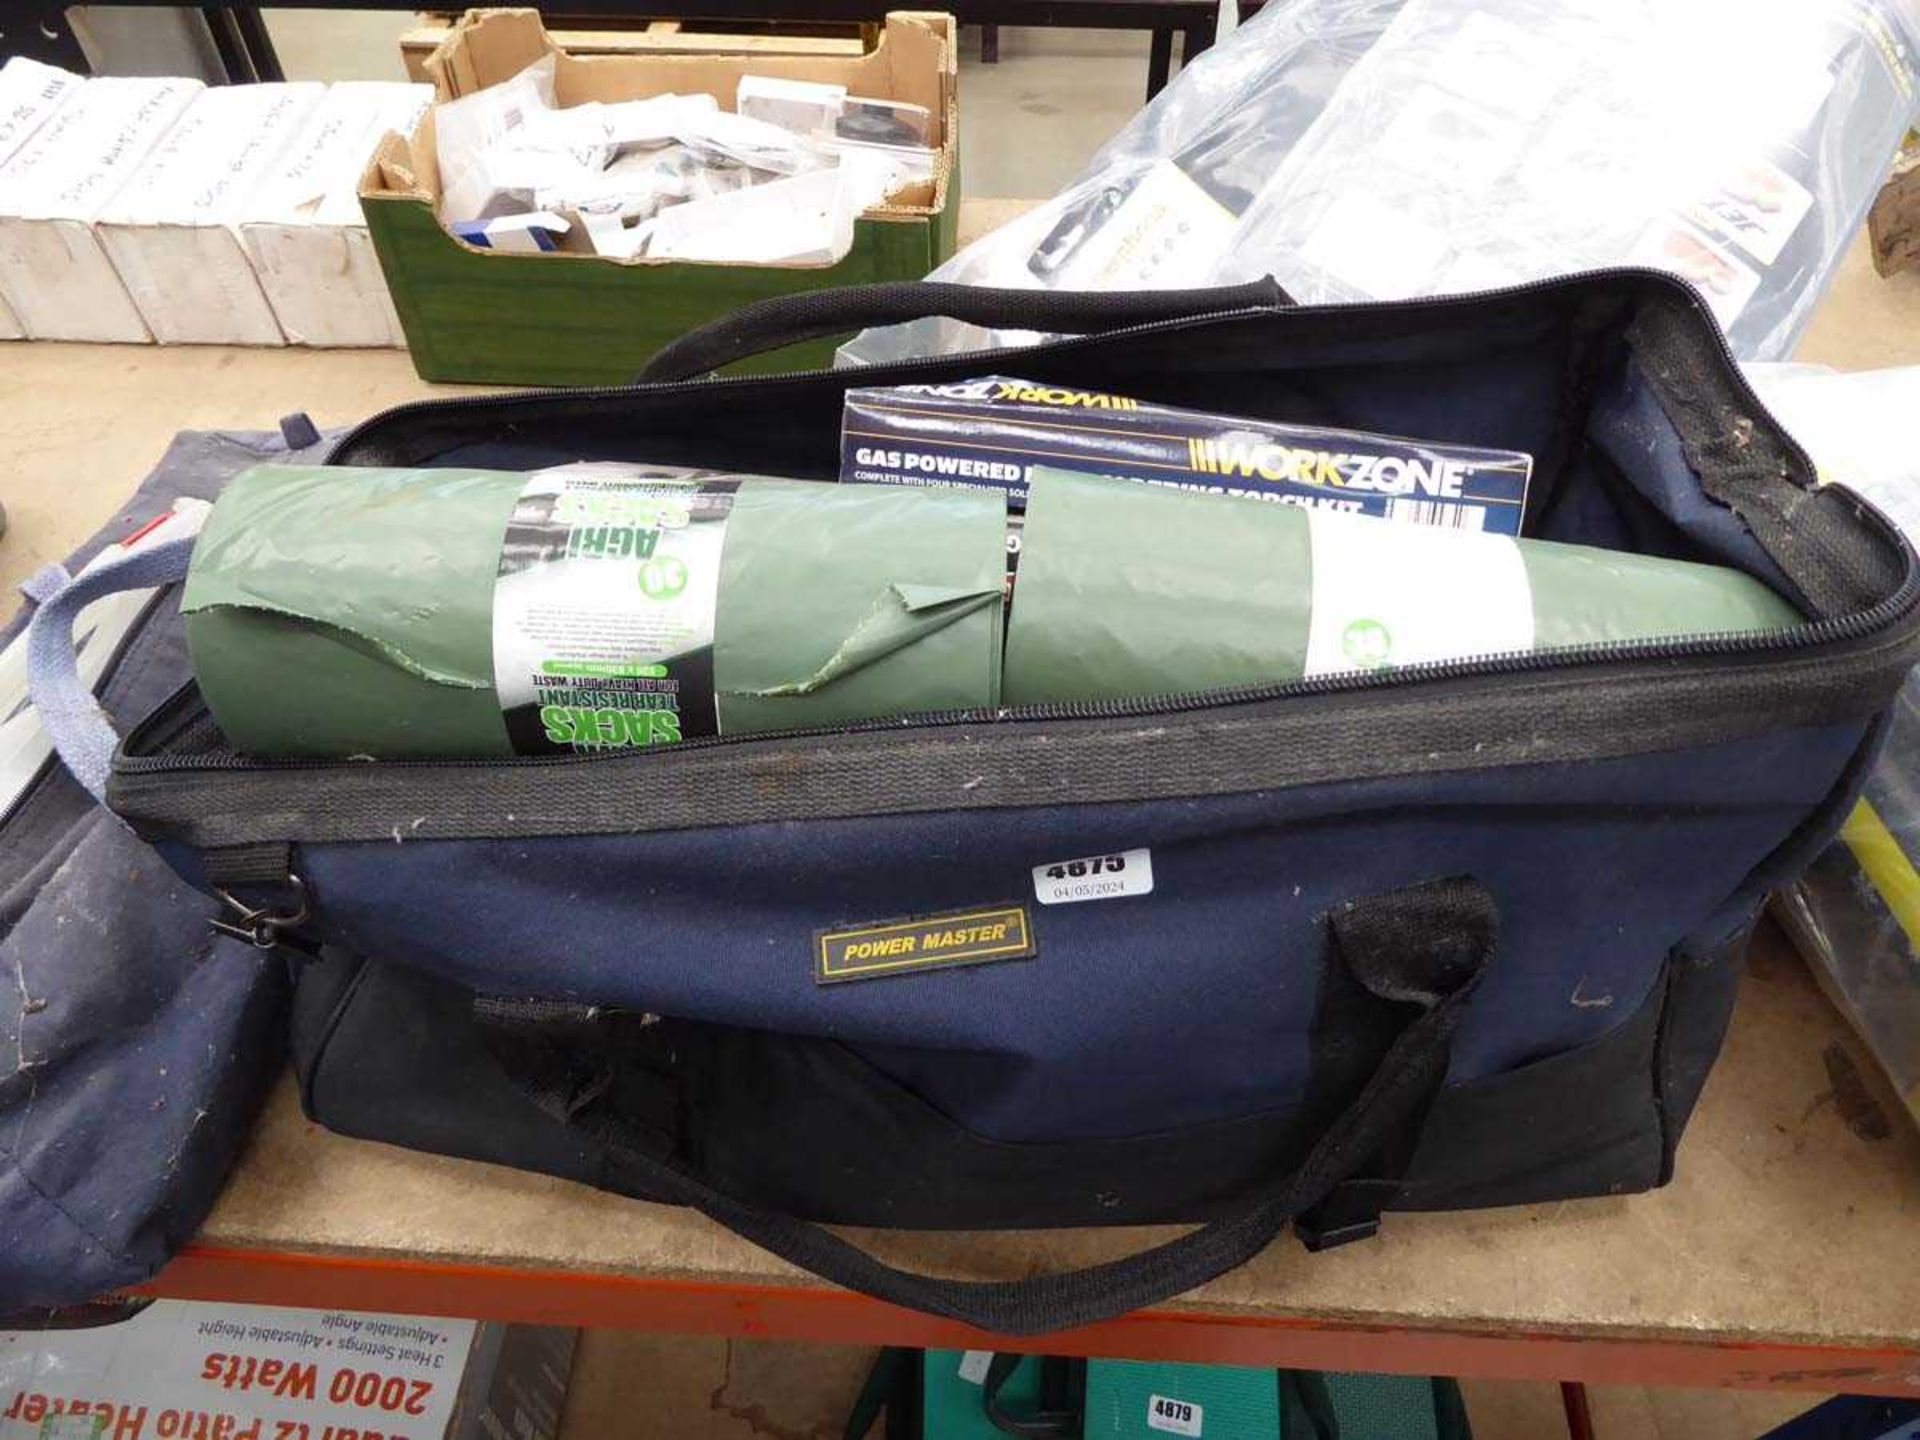 2 toolbags containing large quantity of assorted small tools inc. soldering kits, drill bit sets,